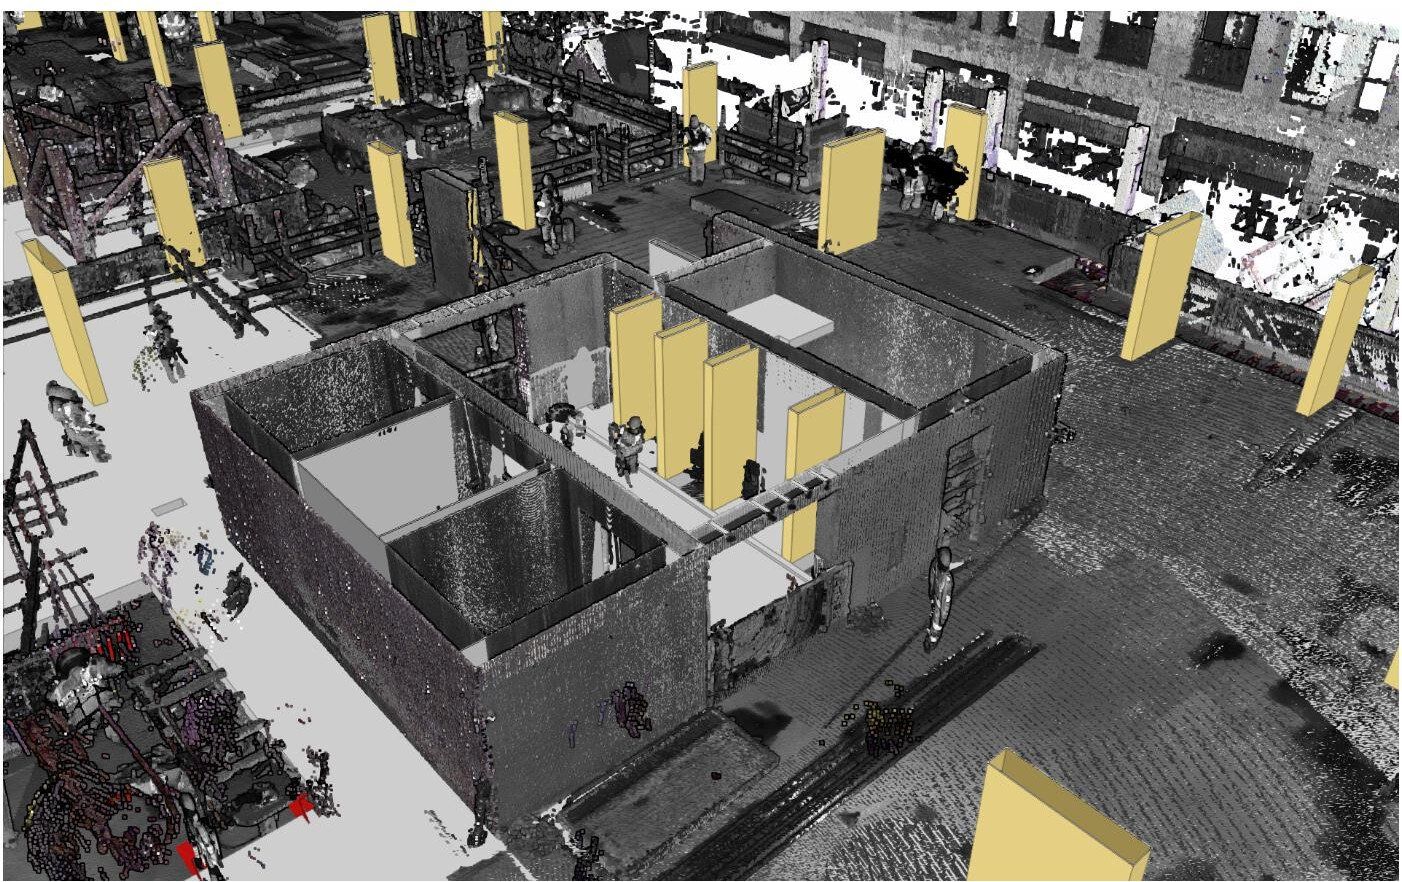 Point Cloud and revit model view